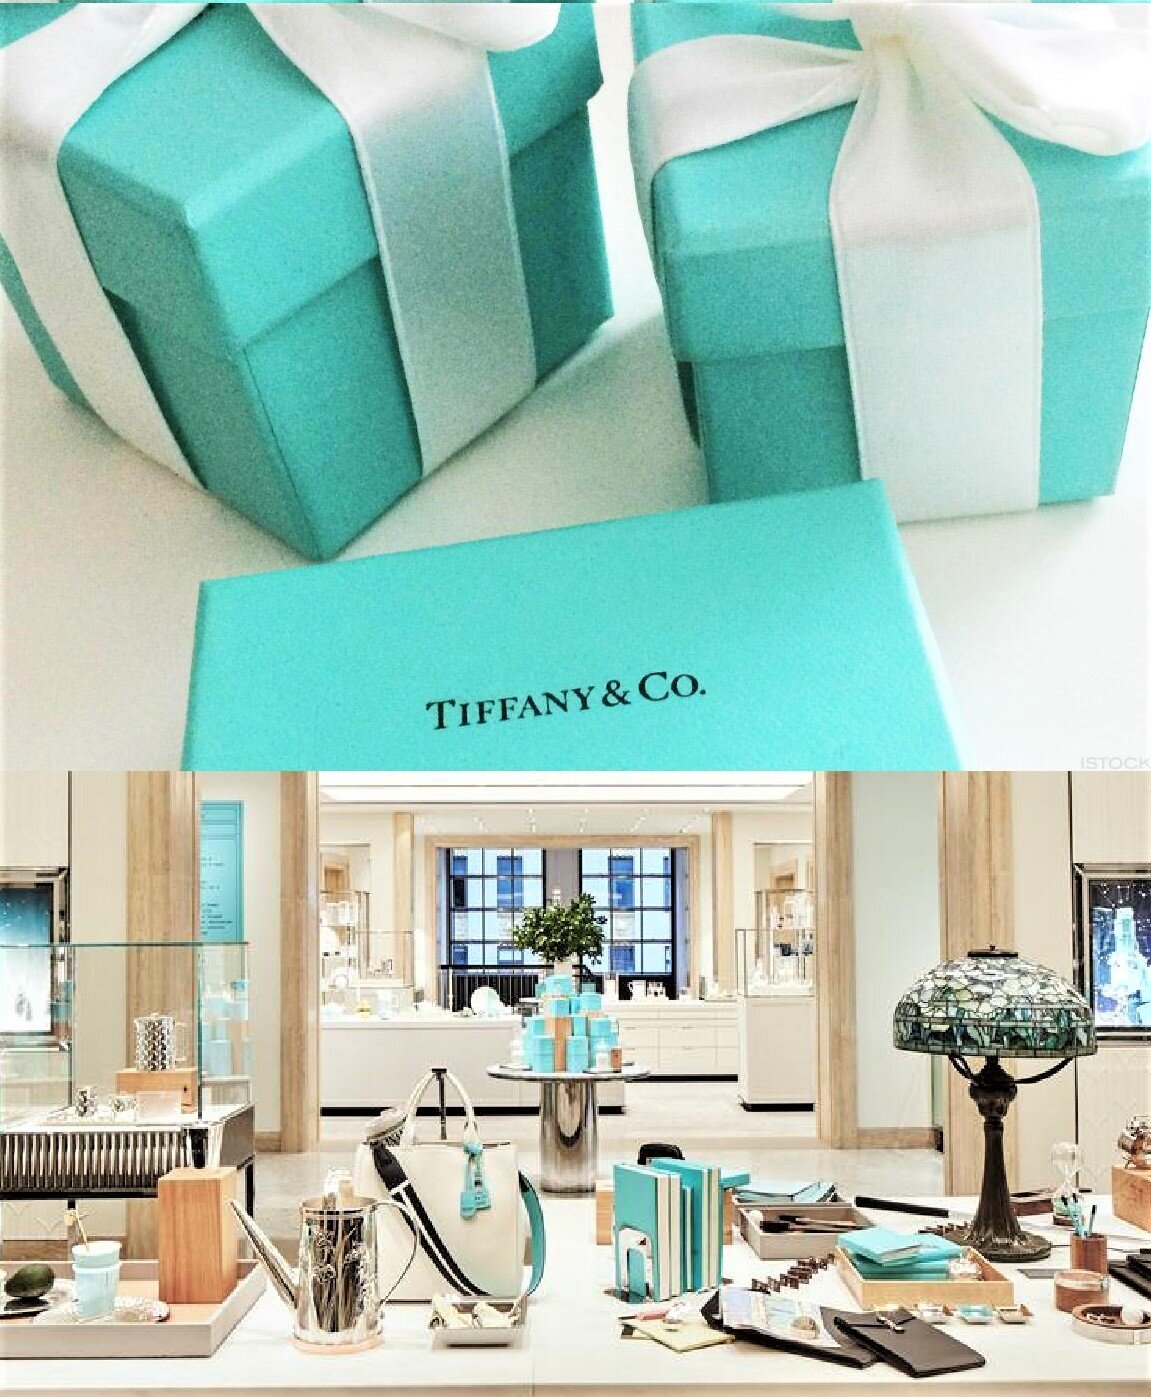 What would an LVMH Tiffany acquisition mean for the luxury